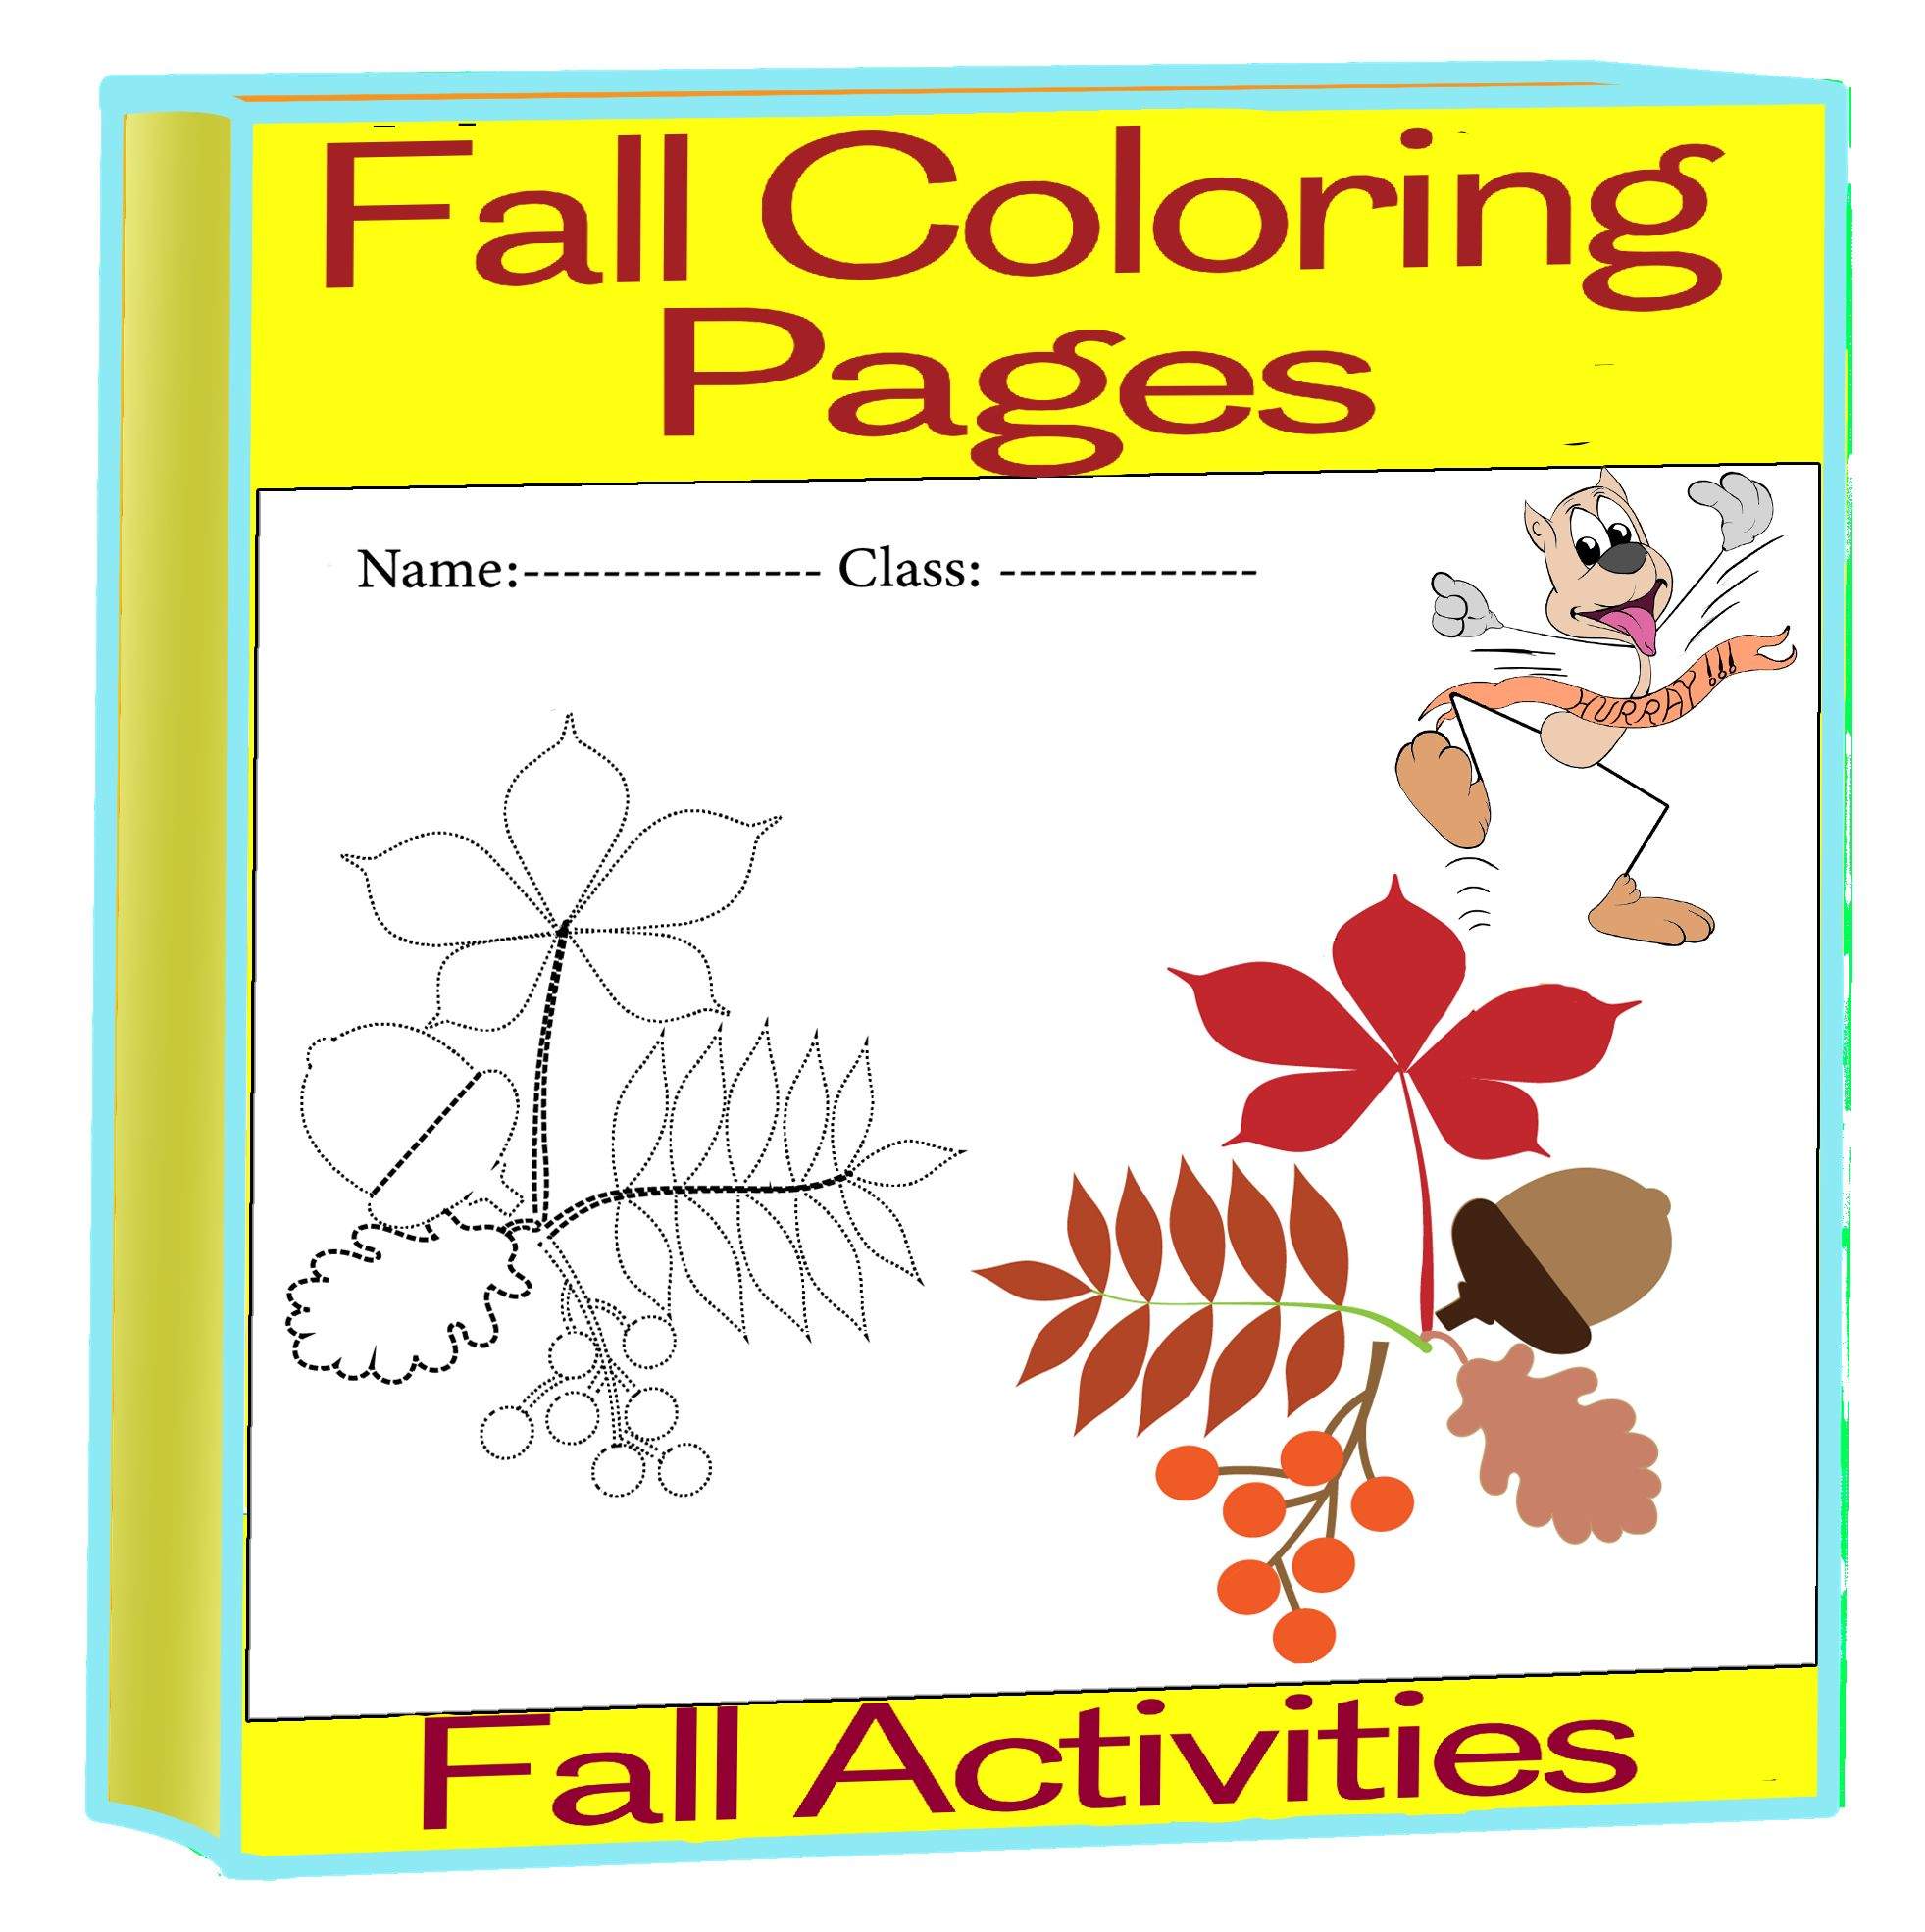 fall coloring pages, fall activities, fall autumn, autumn coloring pages, fall